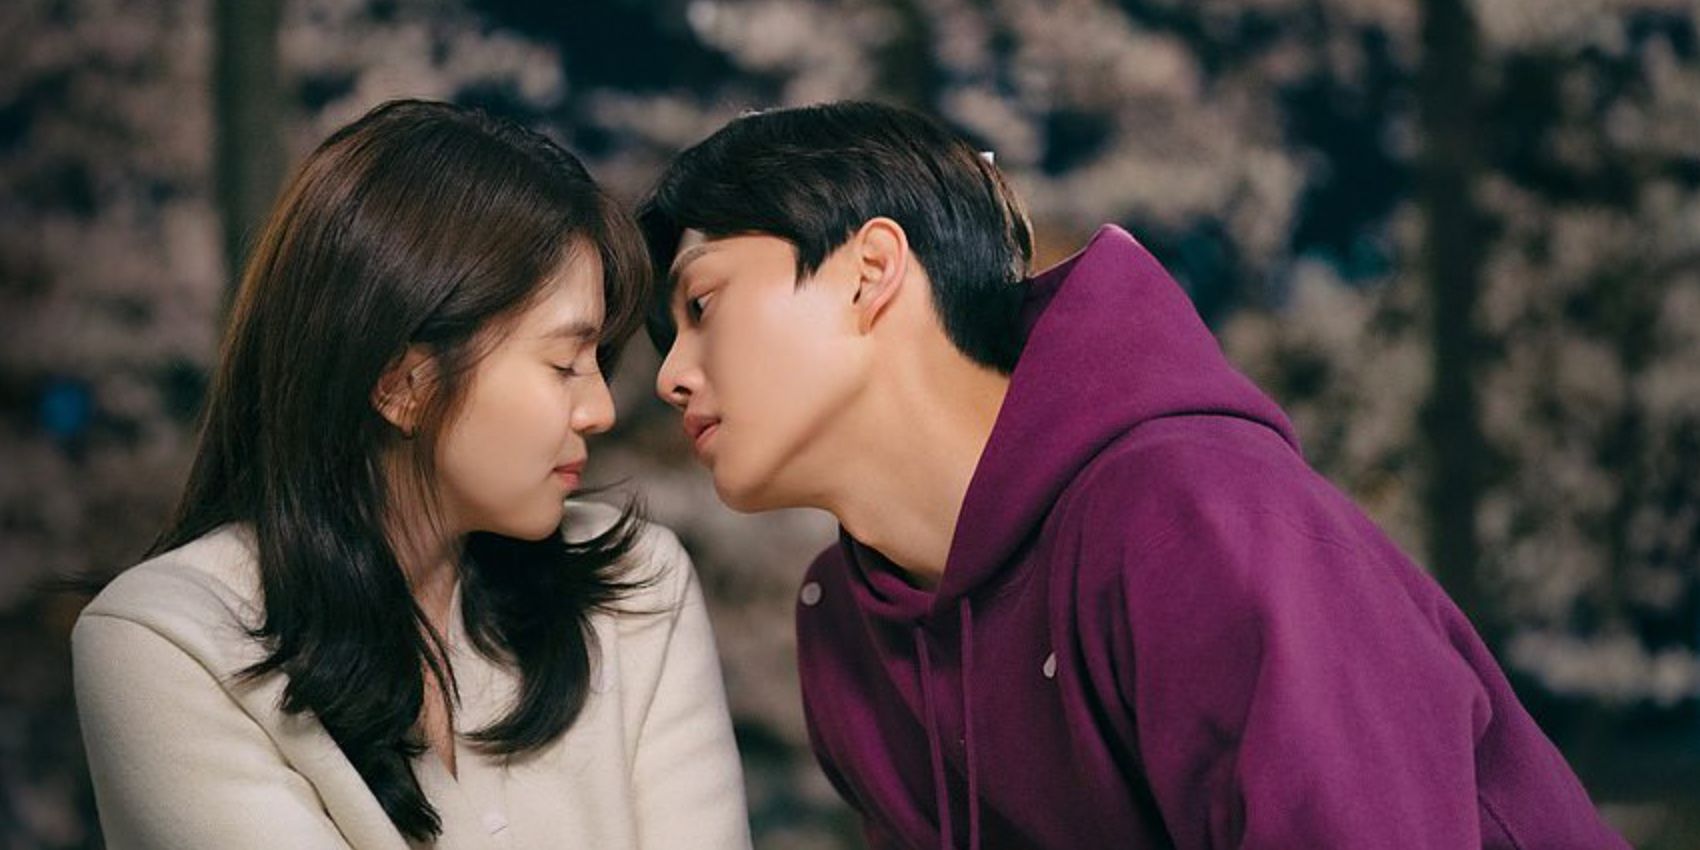 A man leaning in to kiss a woman in the K-drama Nevertheless